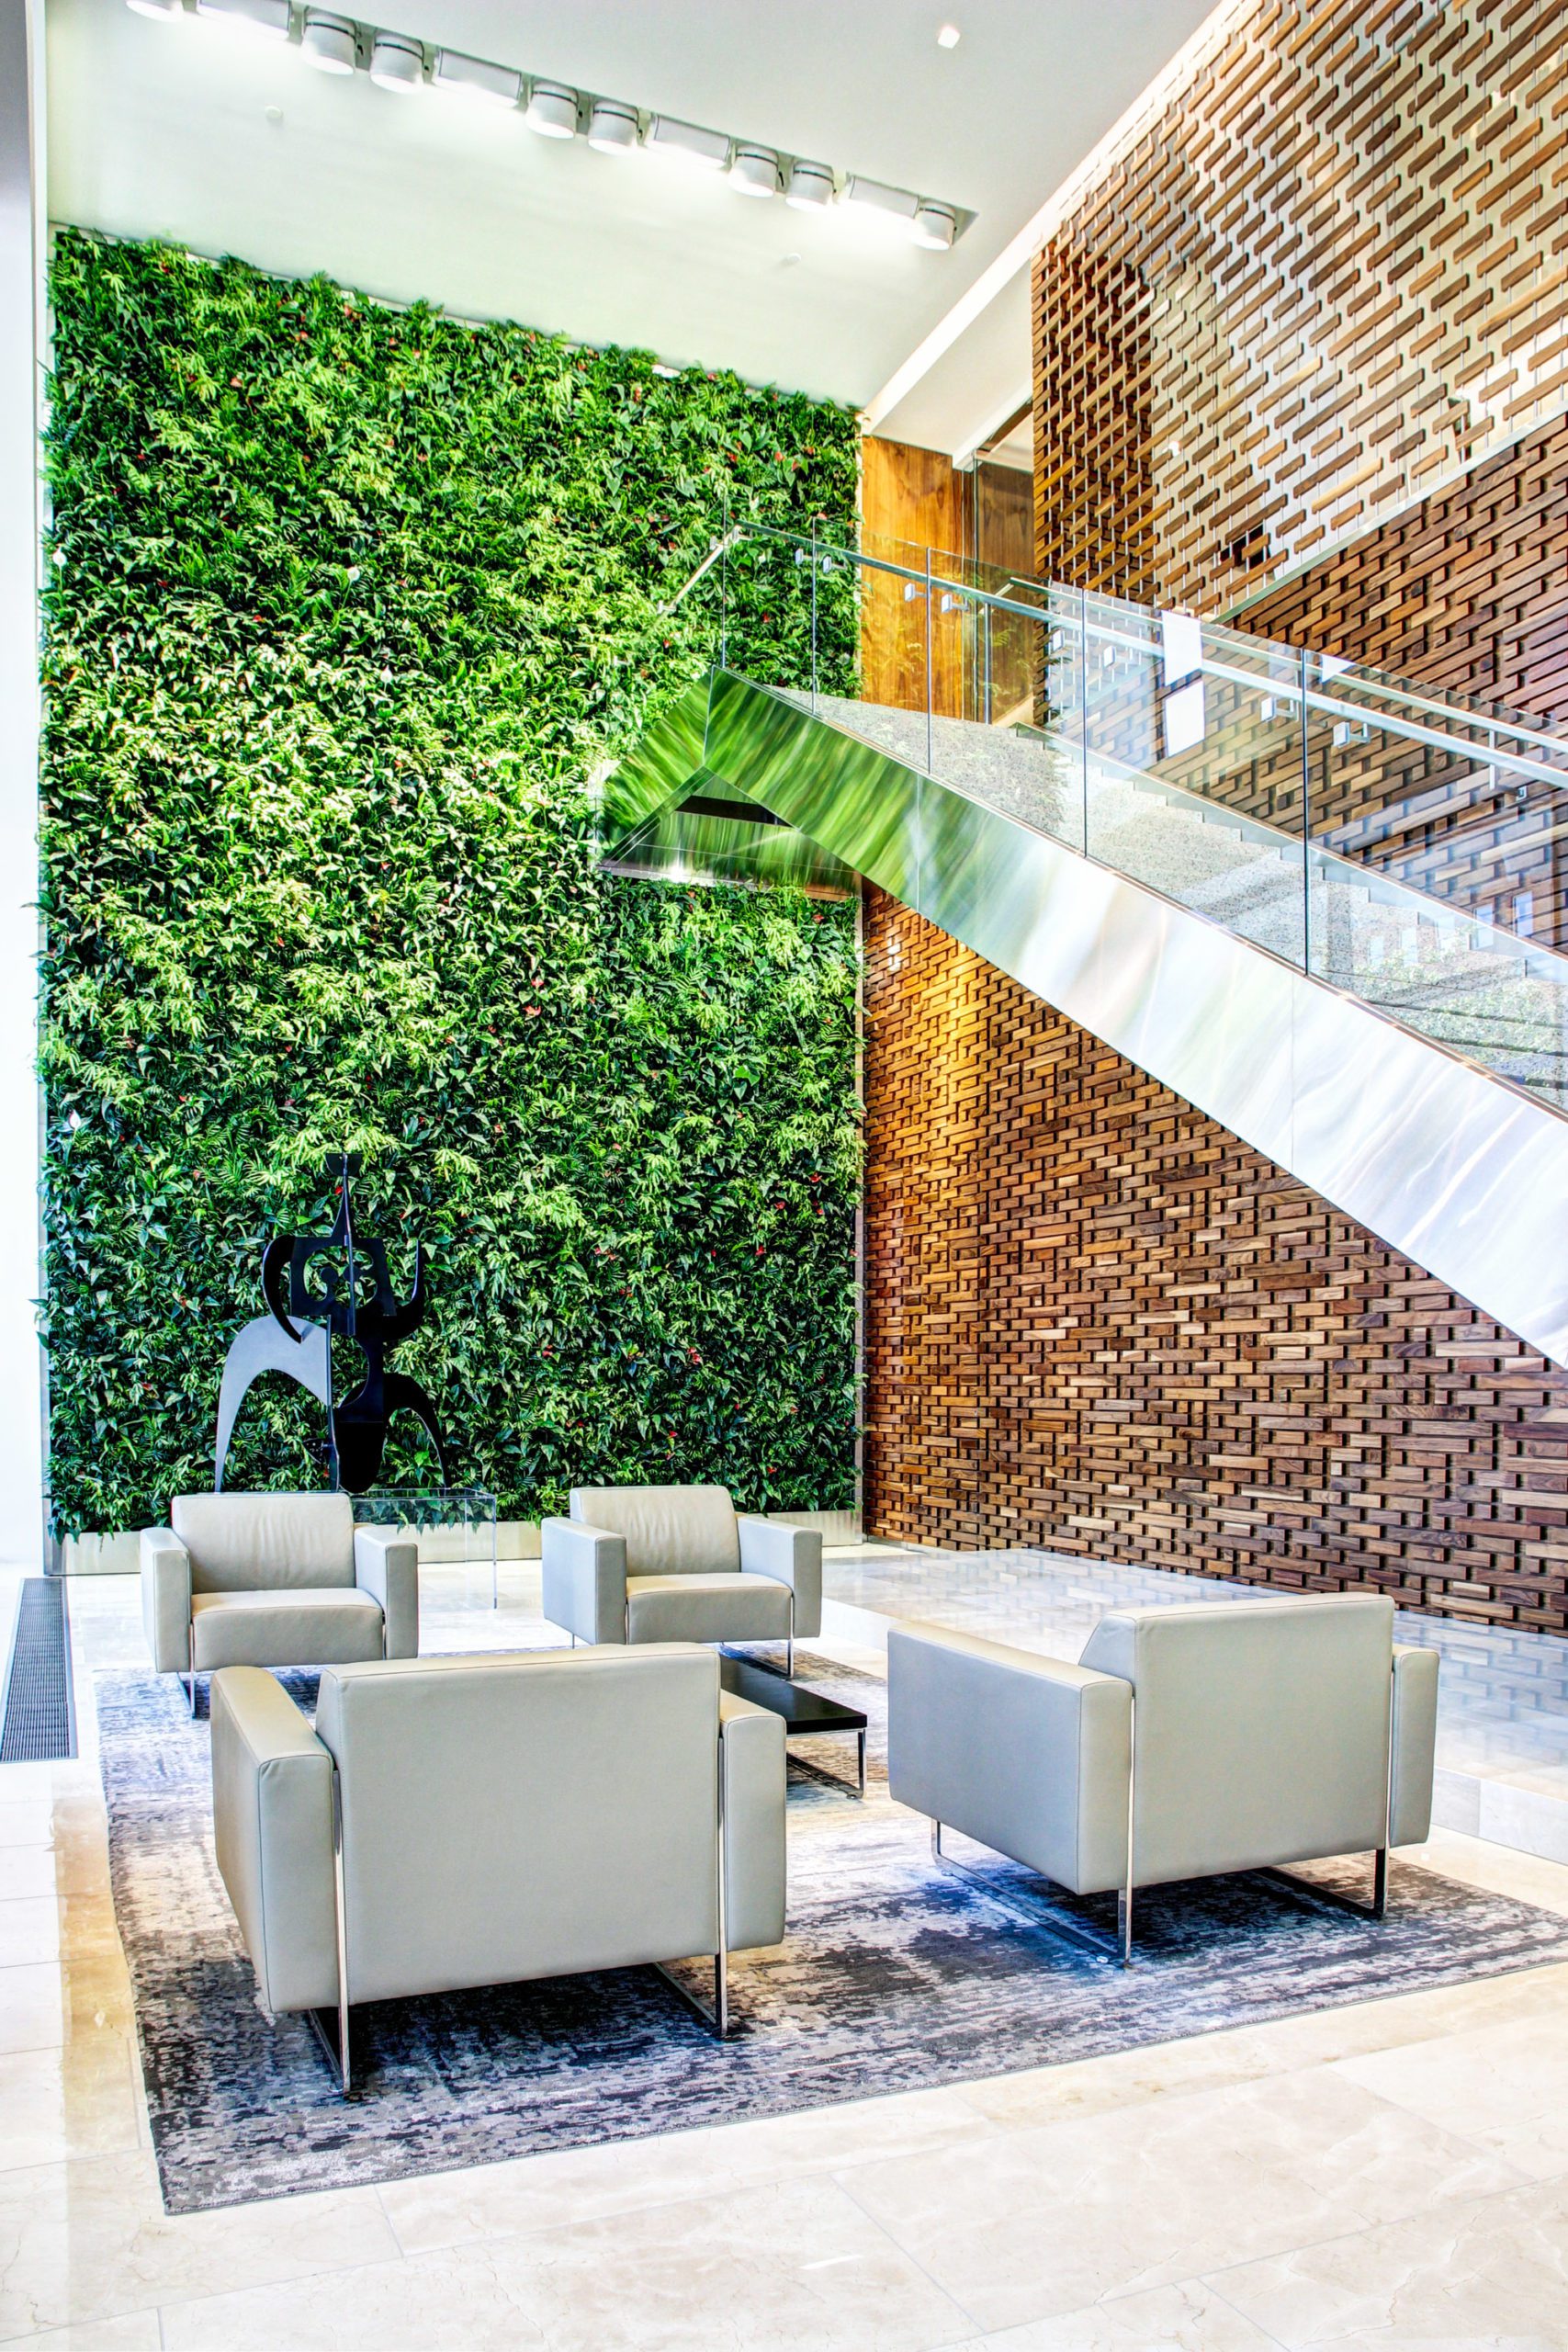 Interior lobby lounge with greenery on the walls